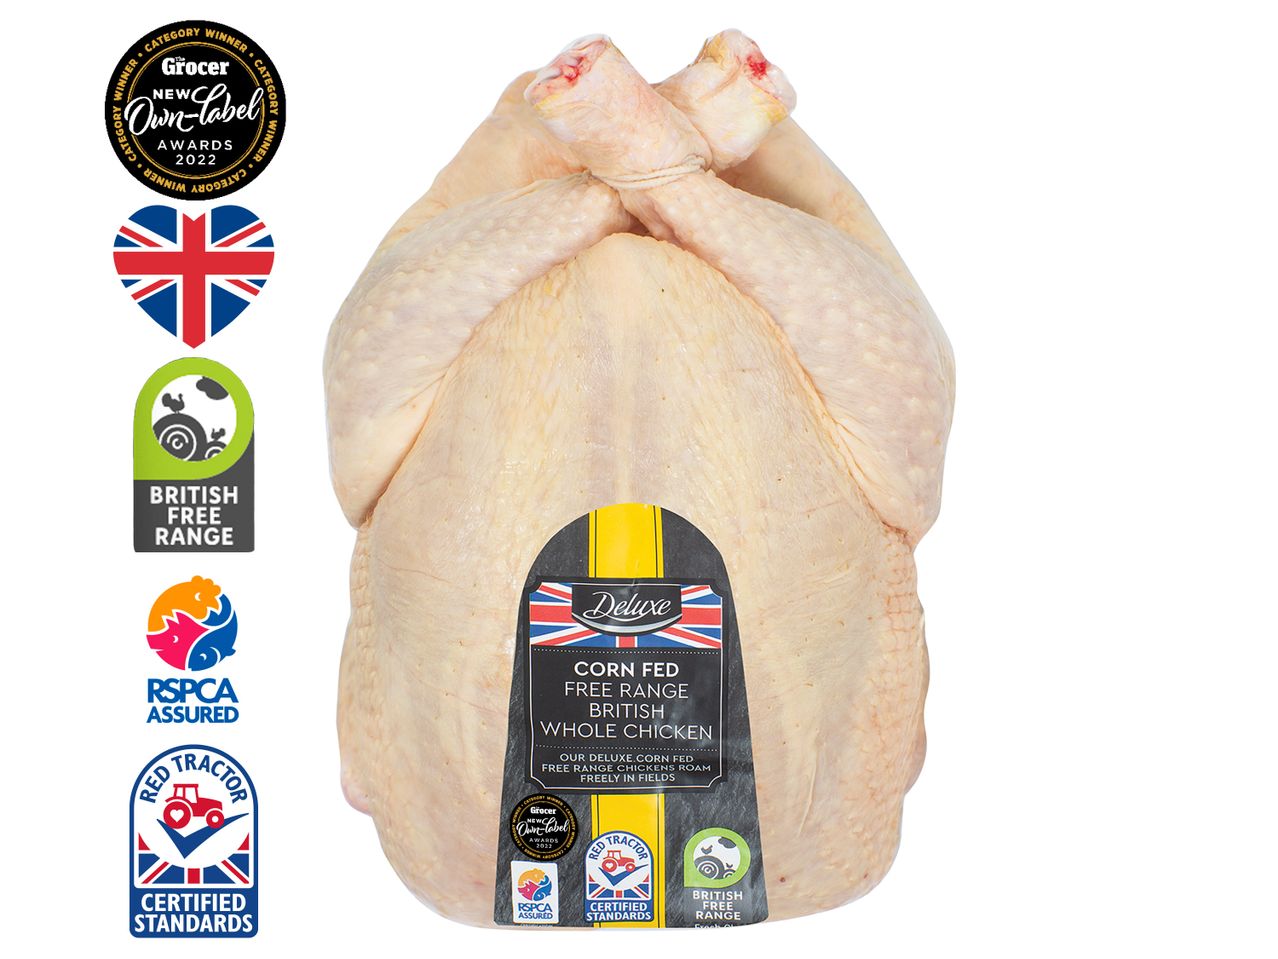 Go to full screen view: Deluxe Corn Fed Free Range British Whole Chicken - Image 1